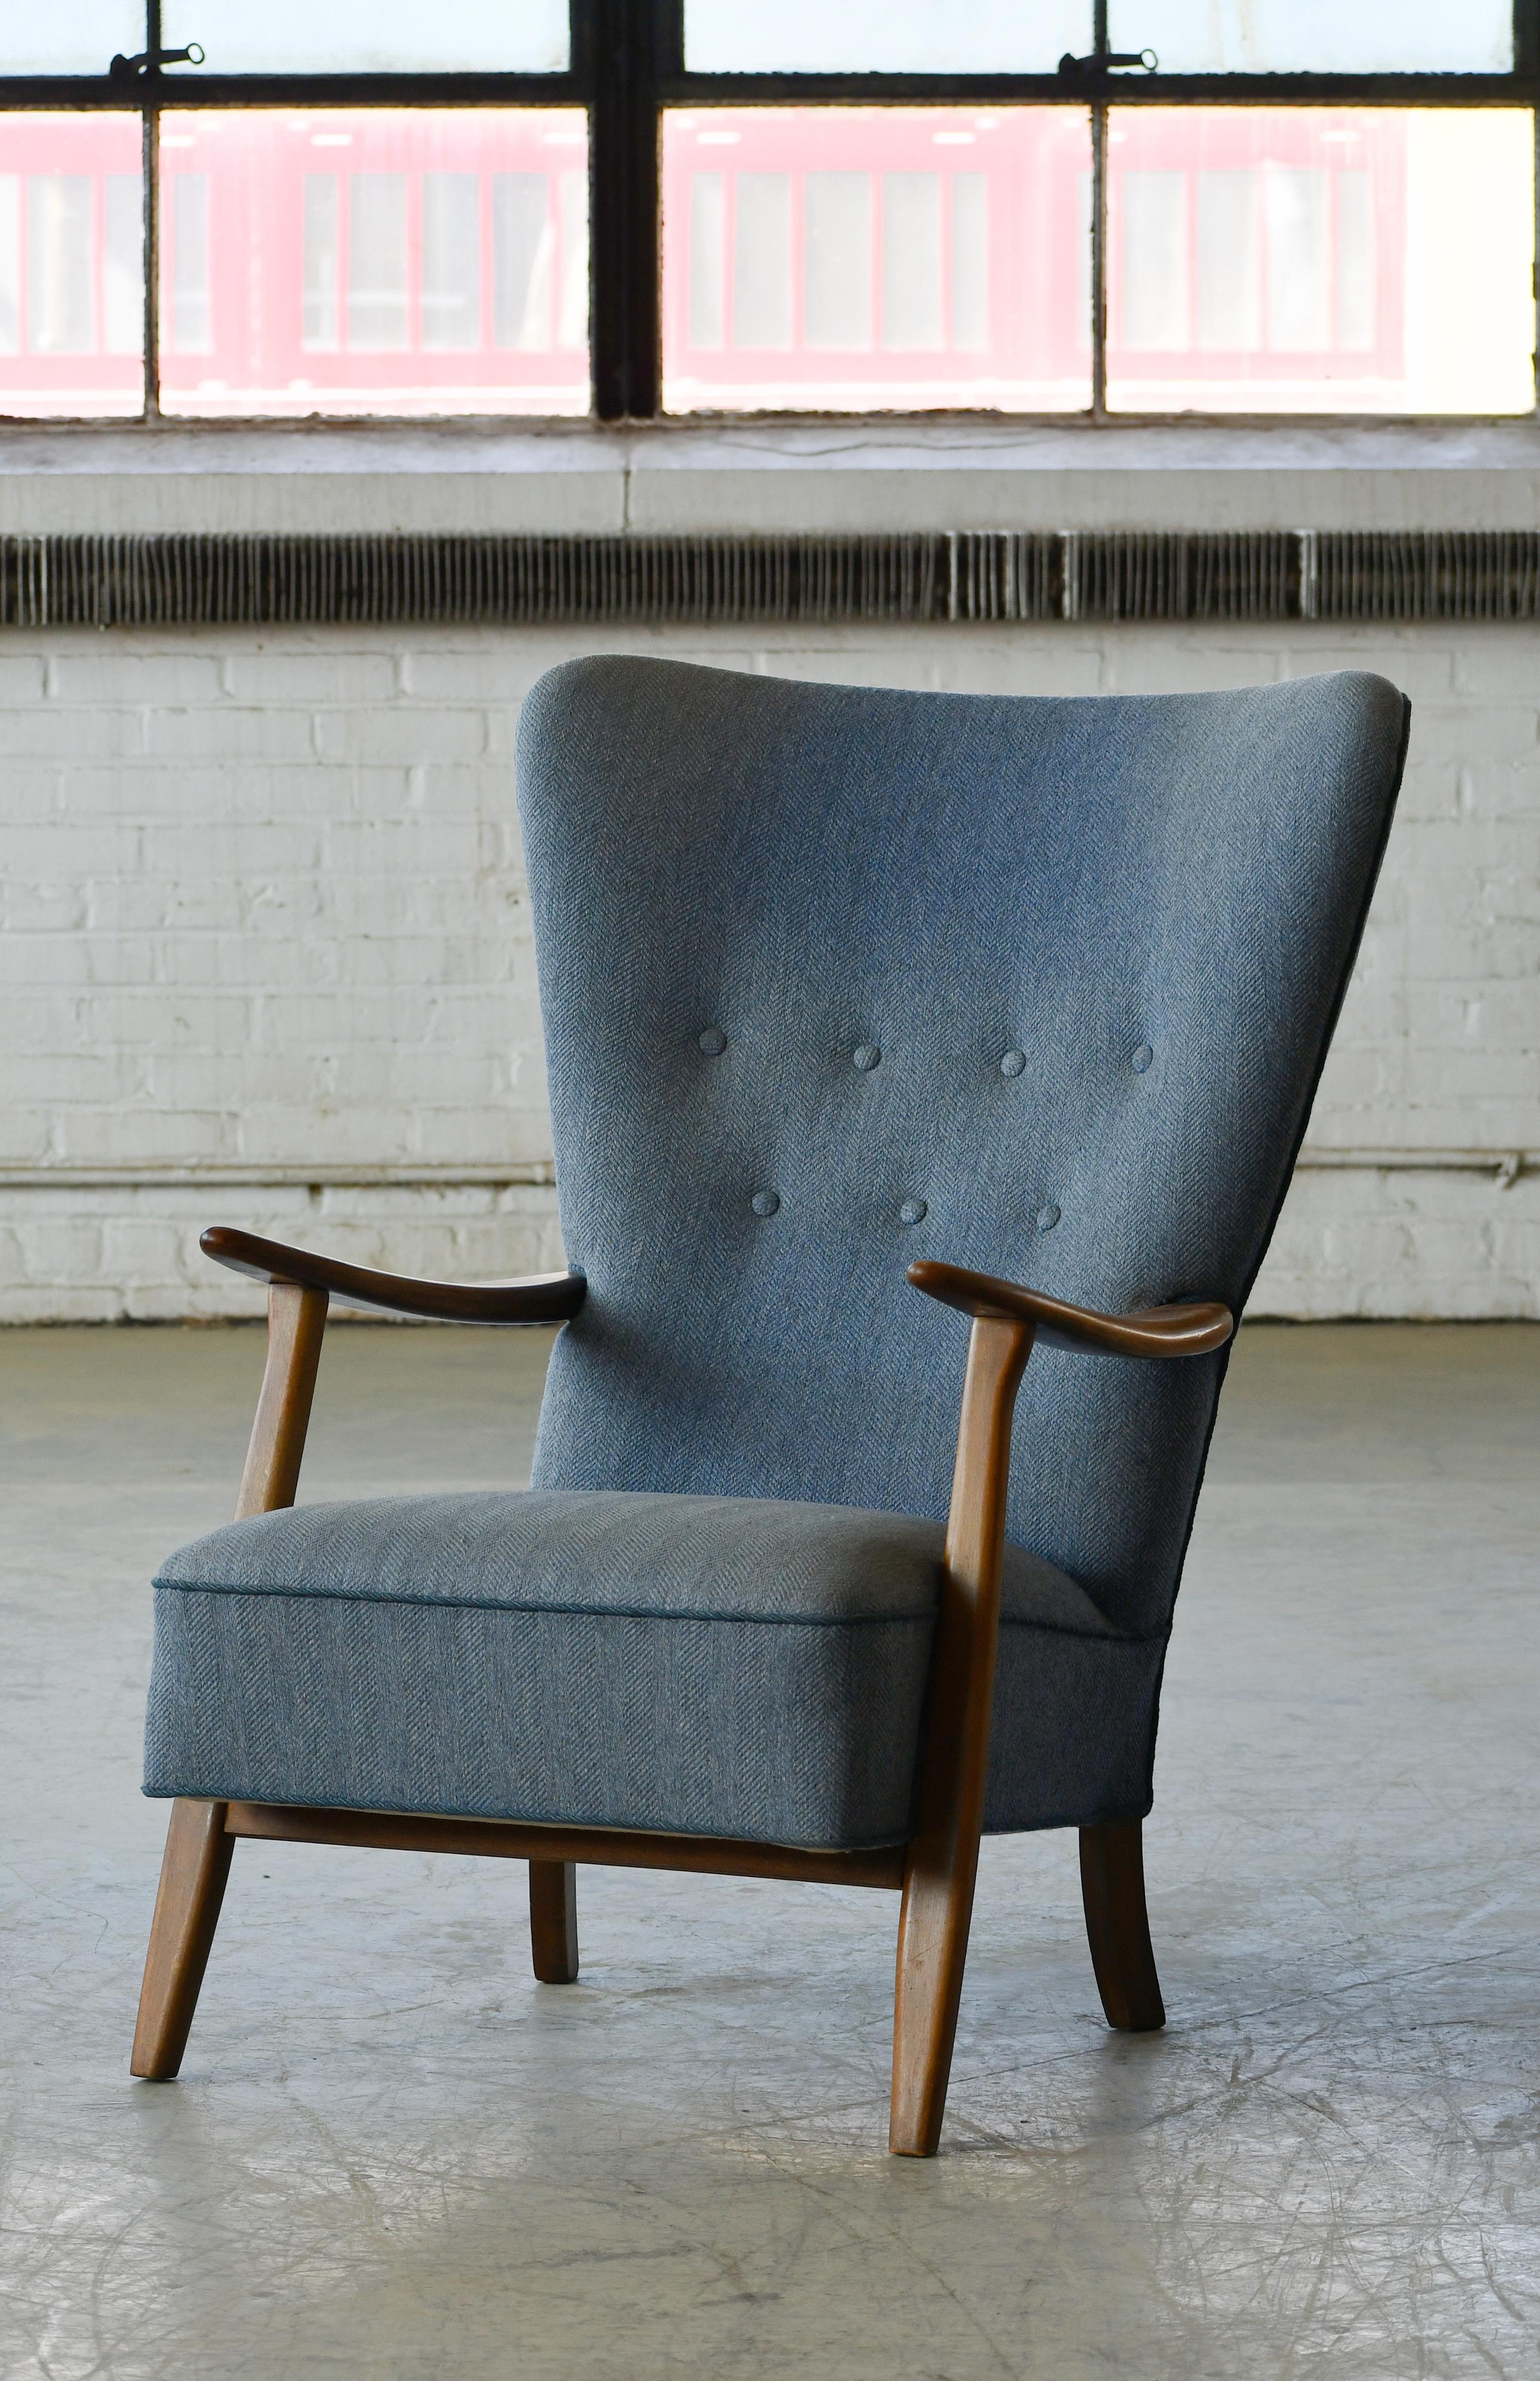 Classic Danish very comfortable high back armchair from the 1940s in the style of Fritz Hansen and Alfred Christensen with open armrests in beautiful stained beech. Nice slim elegant silhouette. Solid and sturdy construction. The fabric and padding